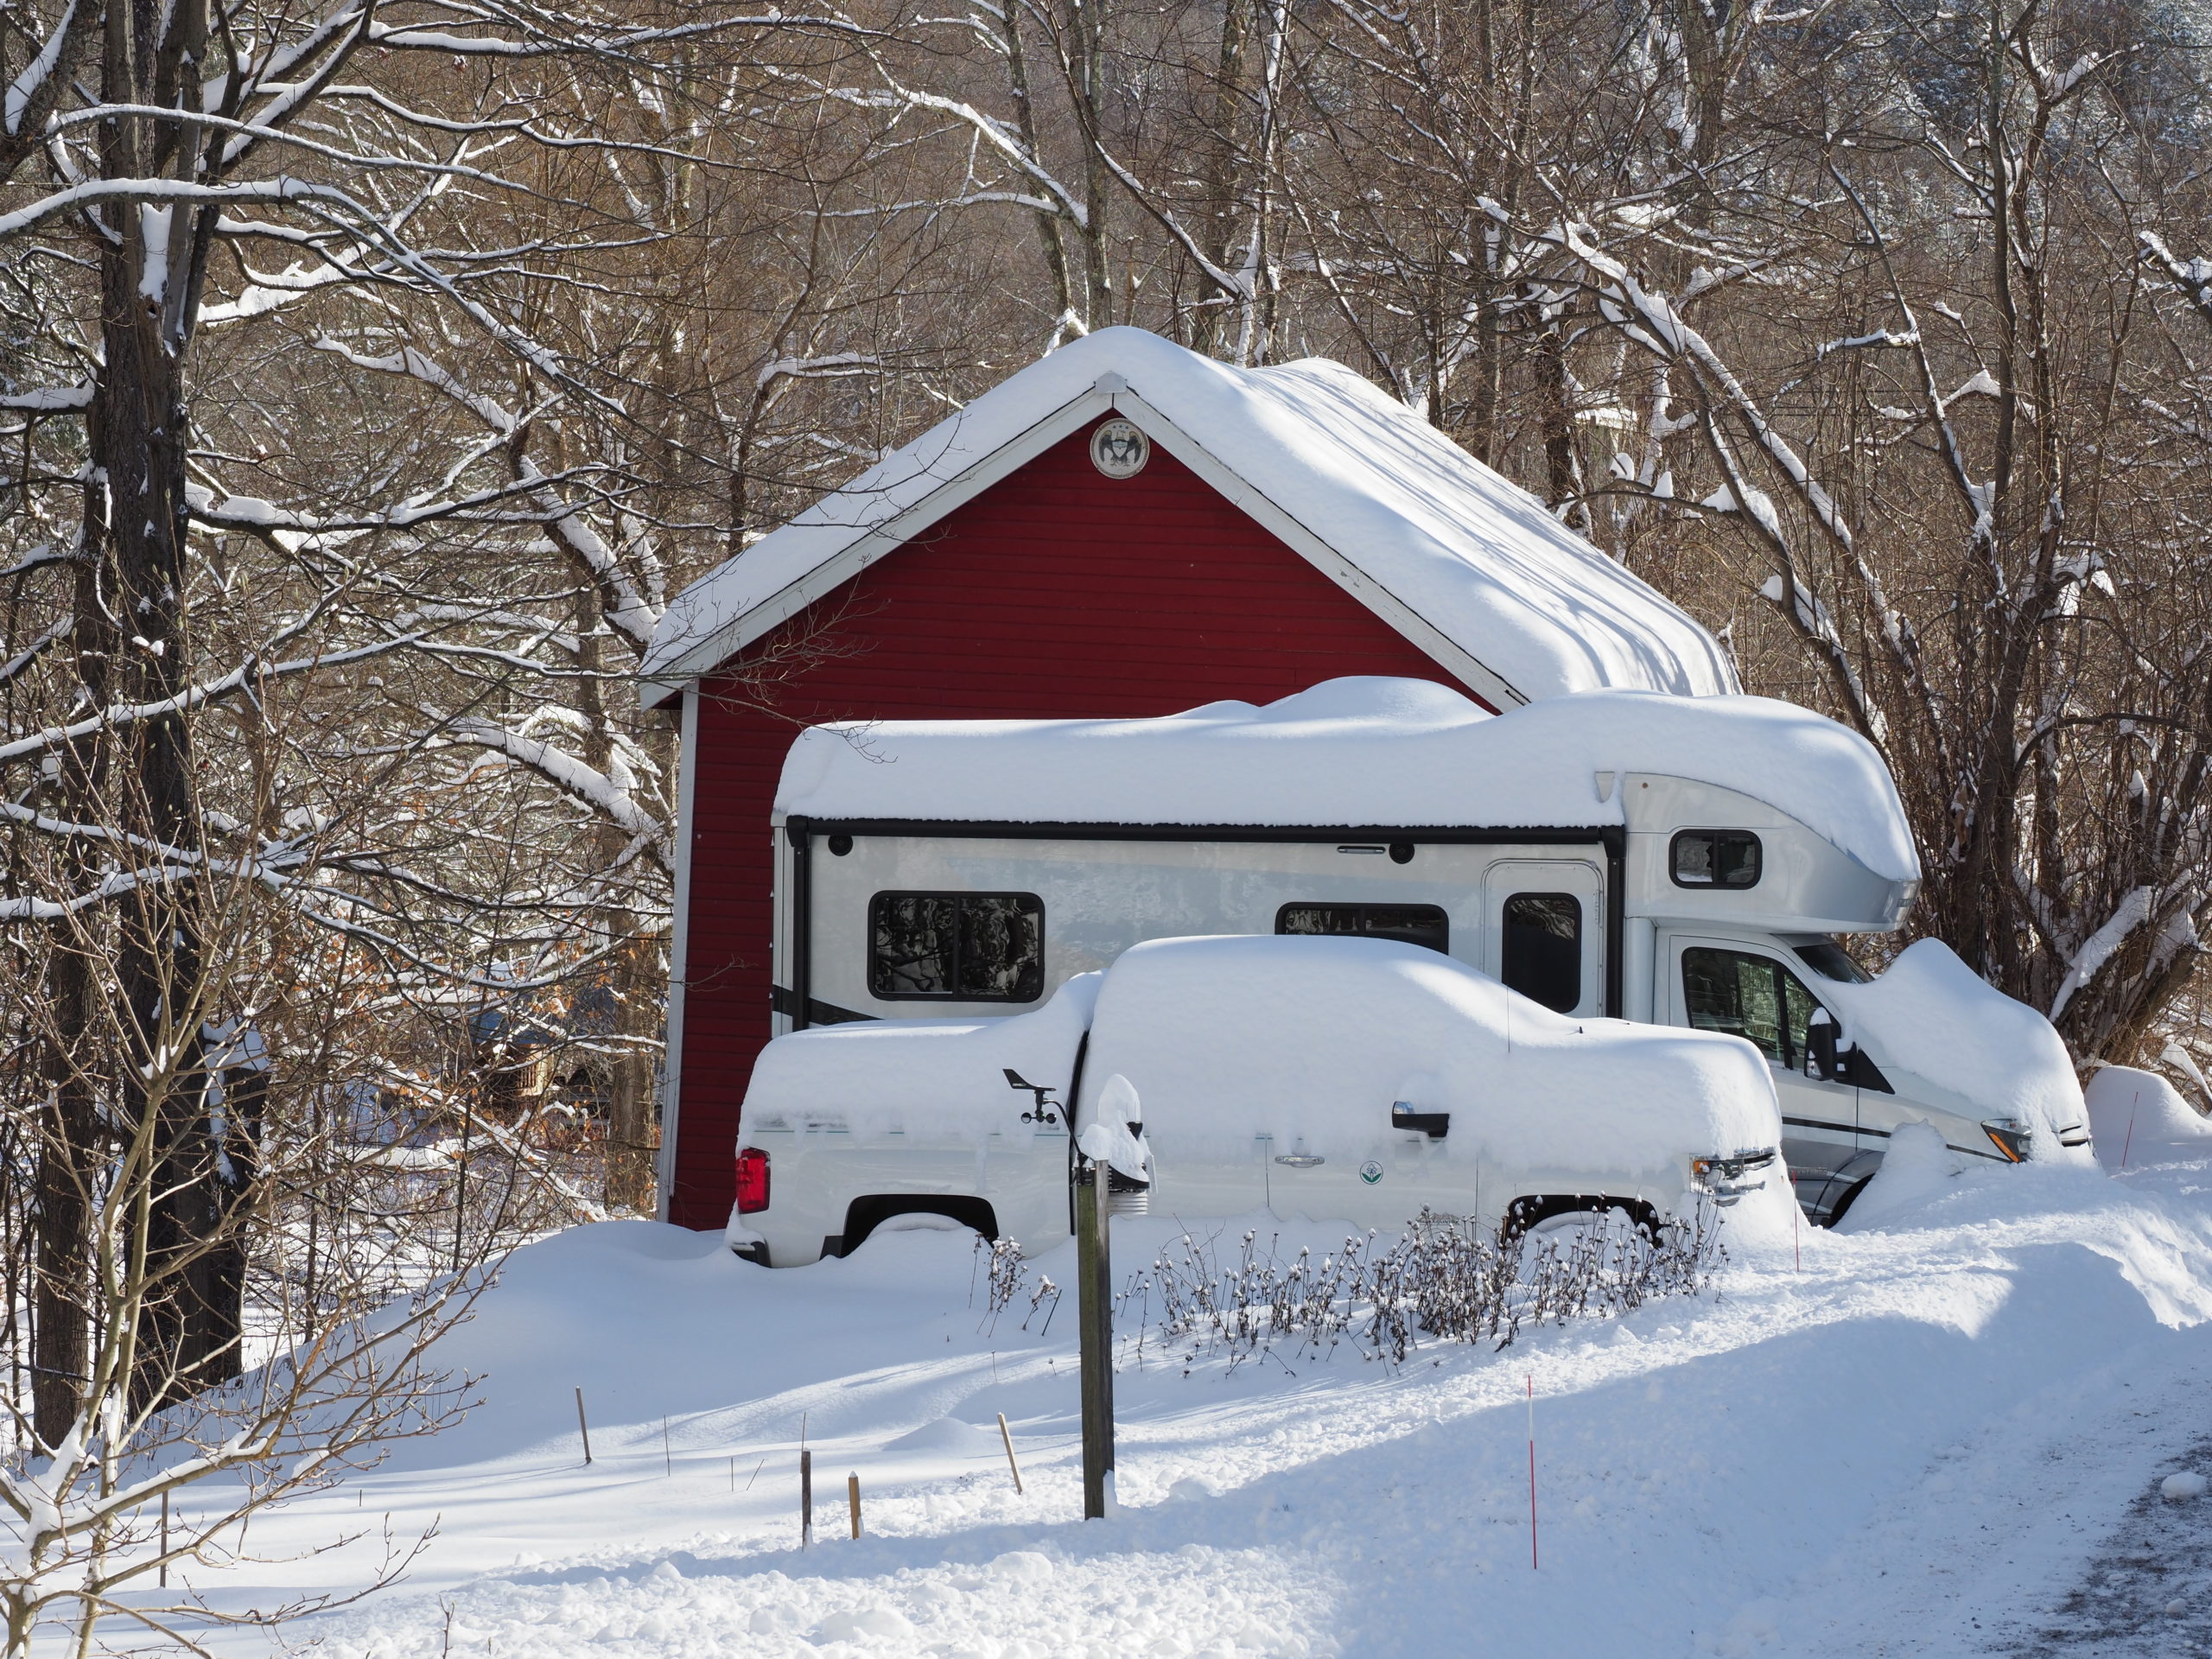 On the left is the trial garden and weather station. Behind the truck and motor home is the red barn just chock full of garden tools and supplies, as well as this year's unfurled Christmas tree. Just in front of the truck is a 30-foot-long Echinacea bed. You can see the stems and seed heads weren’t removed and still get visited by birds seeking missed morsels.